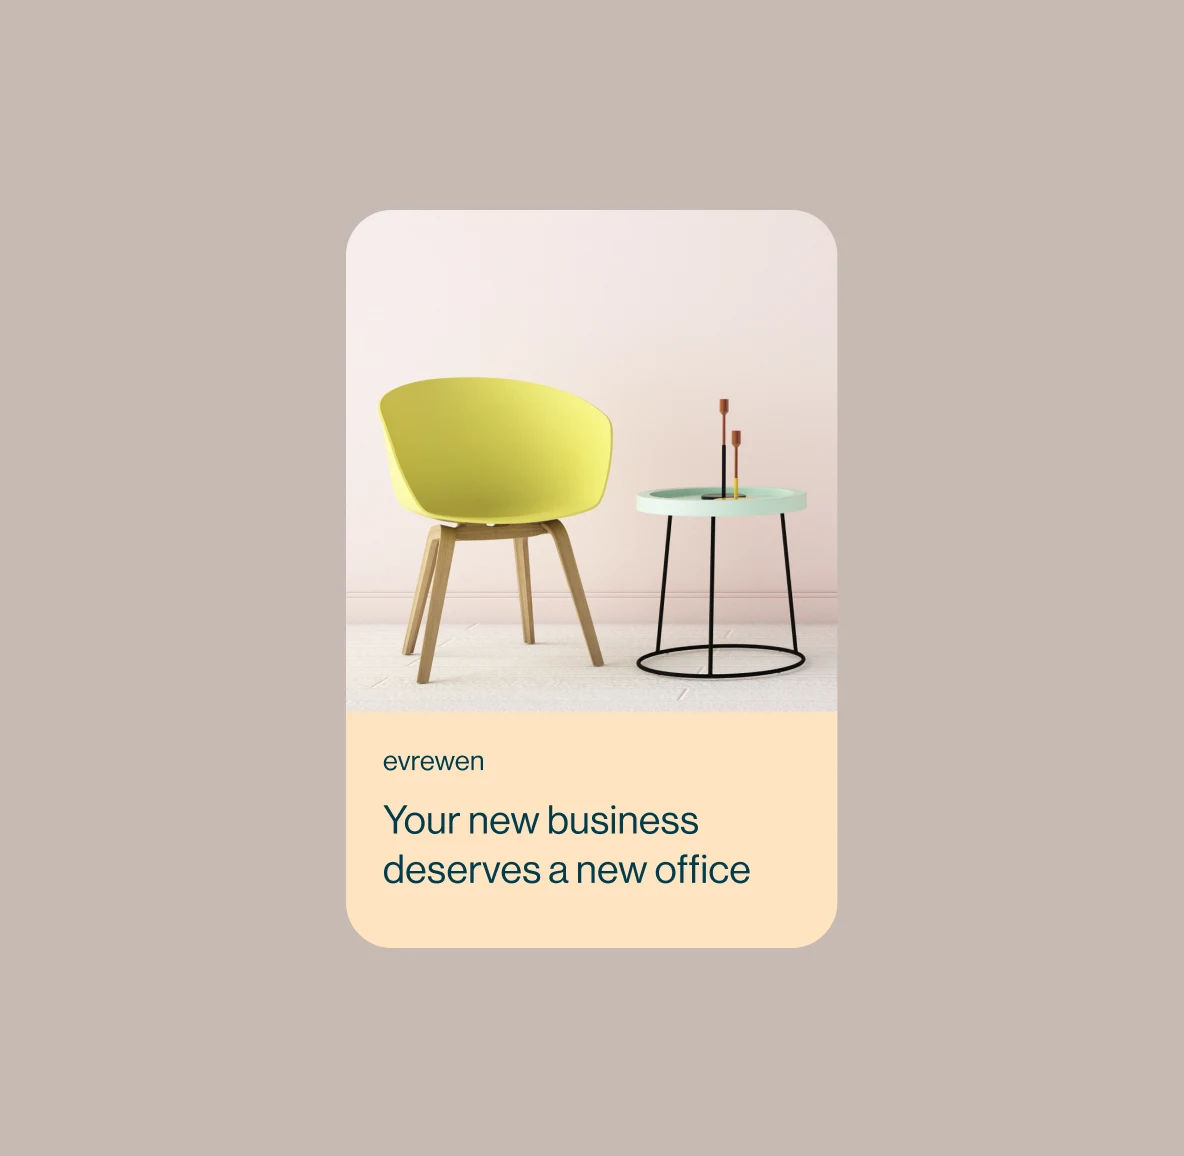 Yellow chair and seafoam green end table in front of a pale purple background with on-screen text that reads: “Your new business deserves a new office.” 